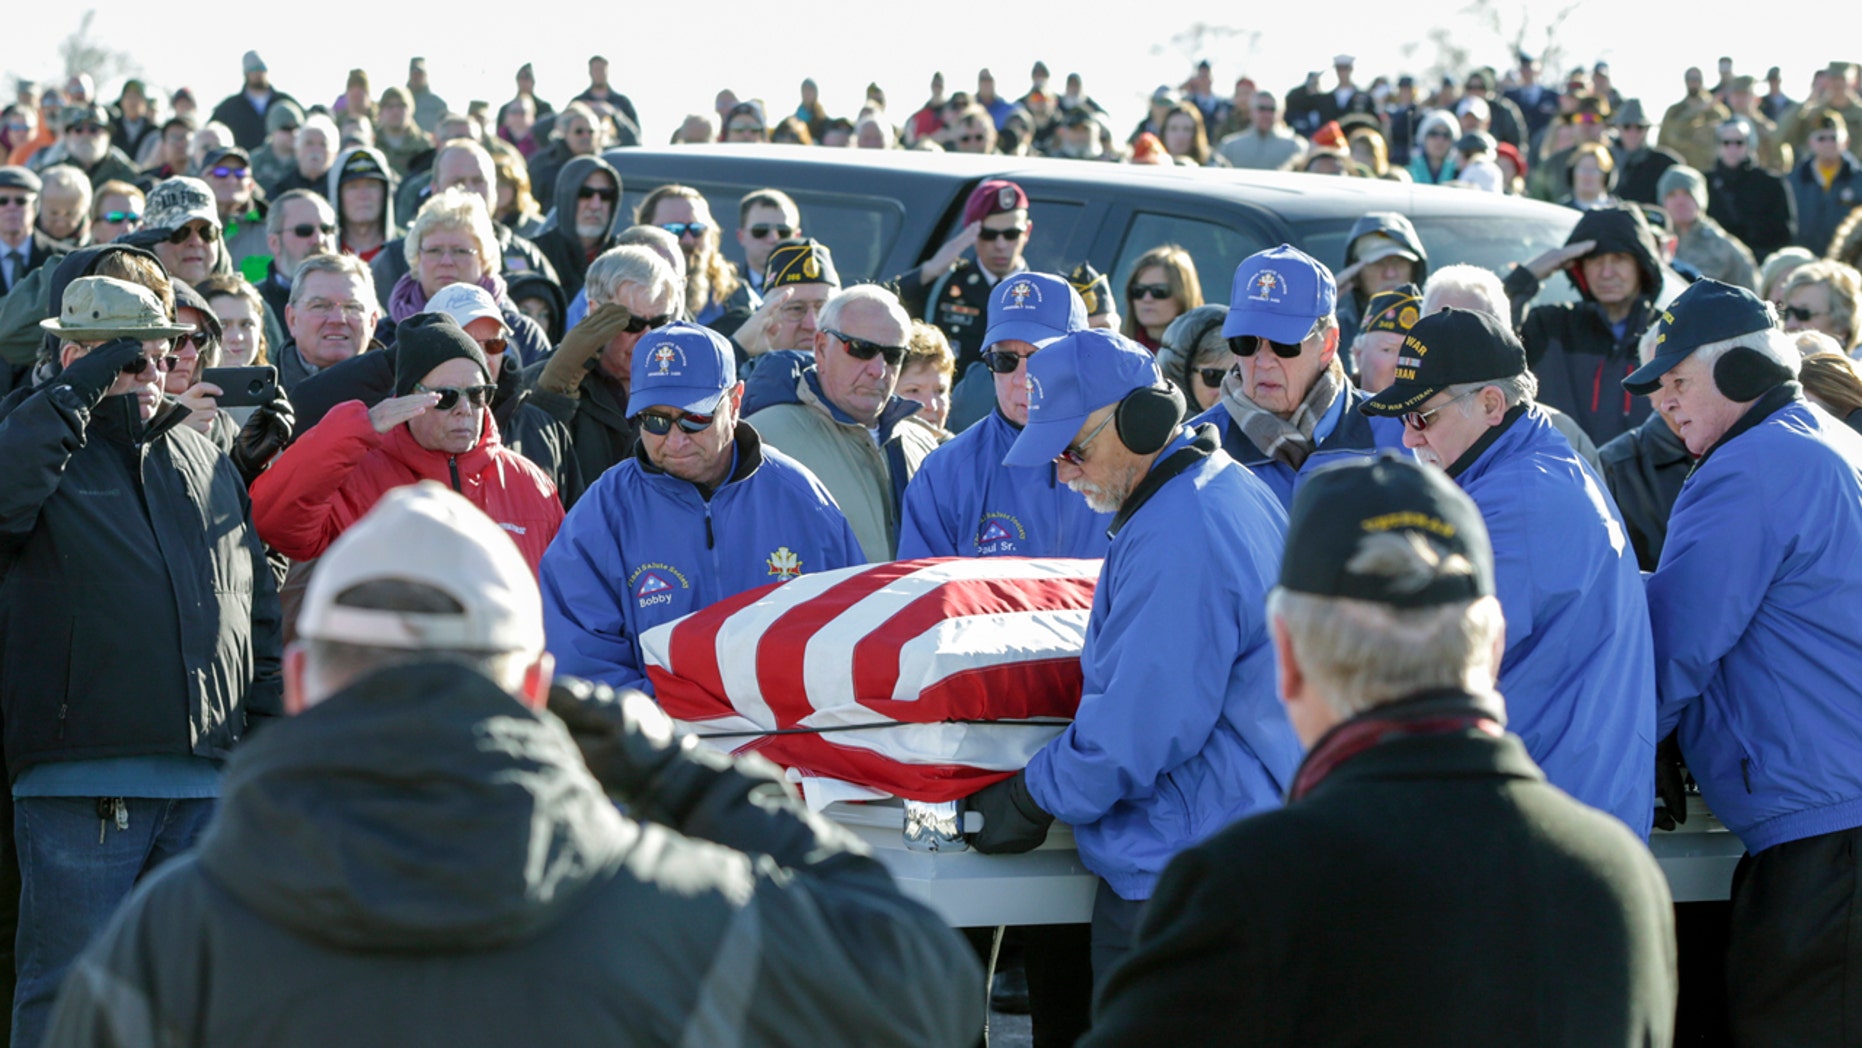 Pallbearers carrying the flag-draped casket of Vietnam veteran Stanley Stoltz at the Omaha National Cemetery on Tuesday. (AP Photo/Nati Harnik)